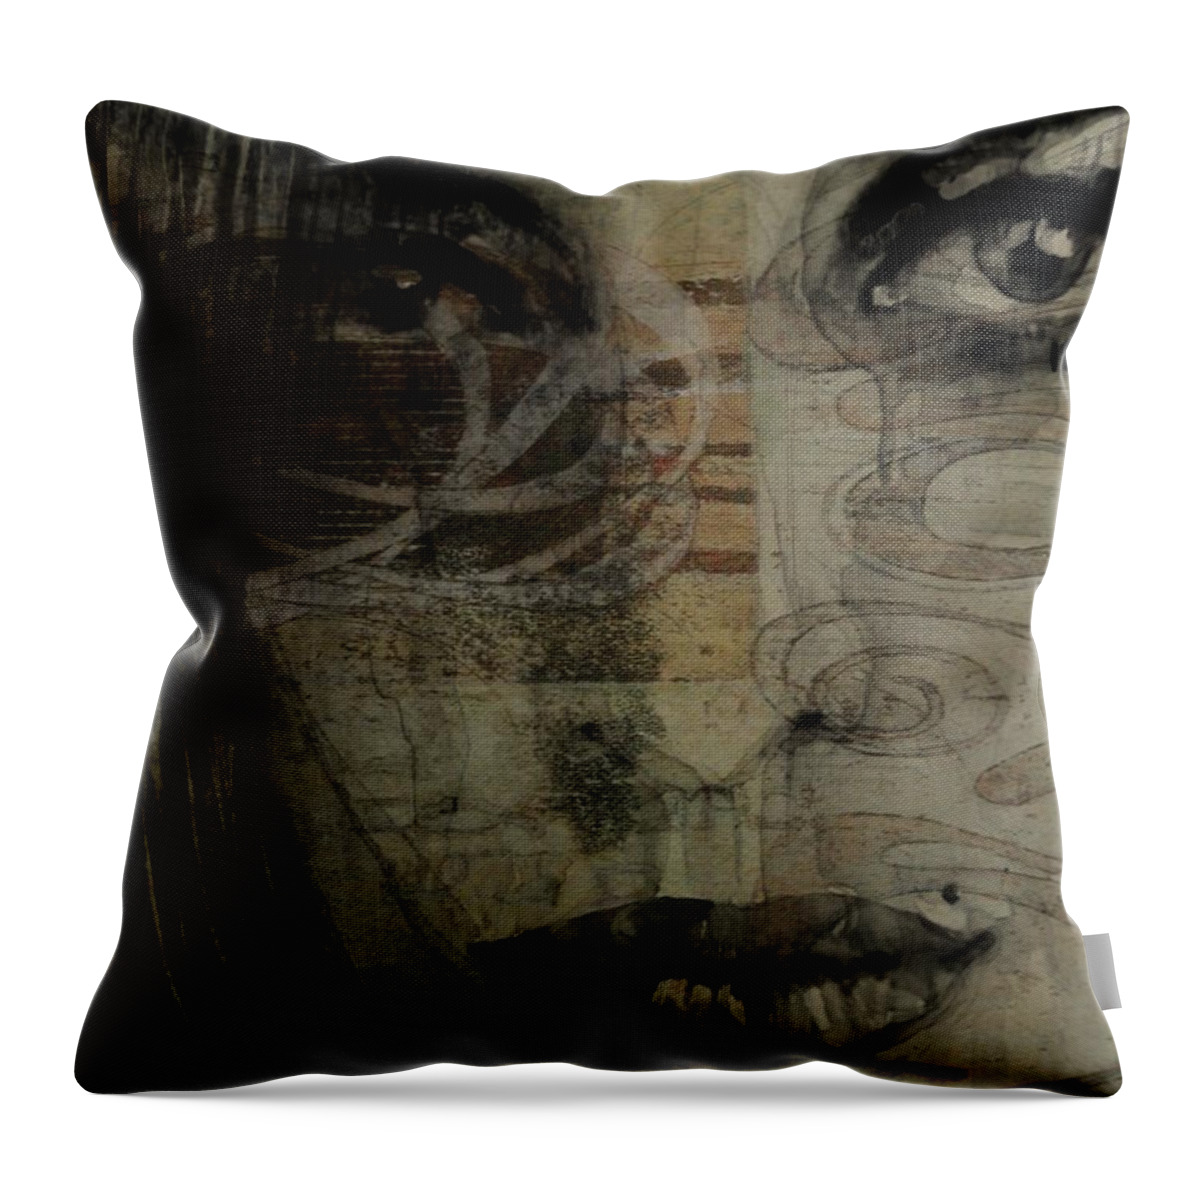 Amy Winehouse Throw Pillow featuring the painting Amy Winehouse - Back To Black by Paul Lovering